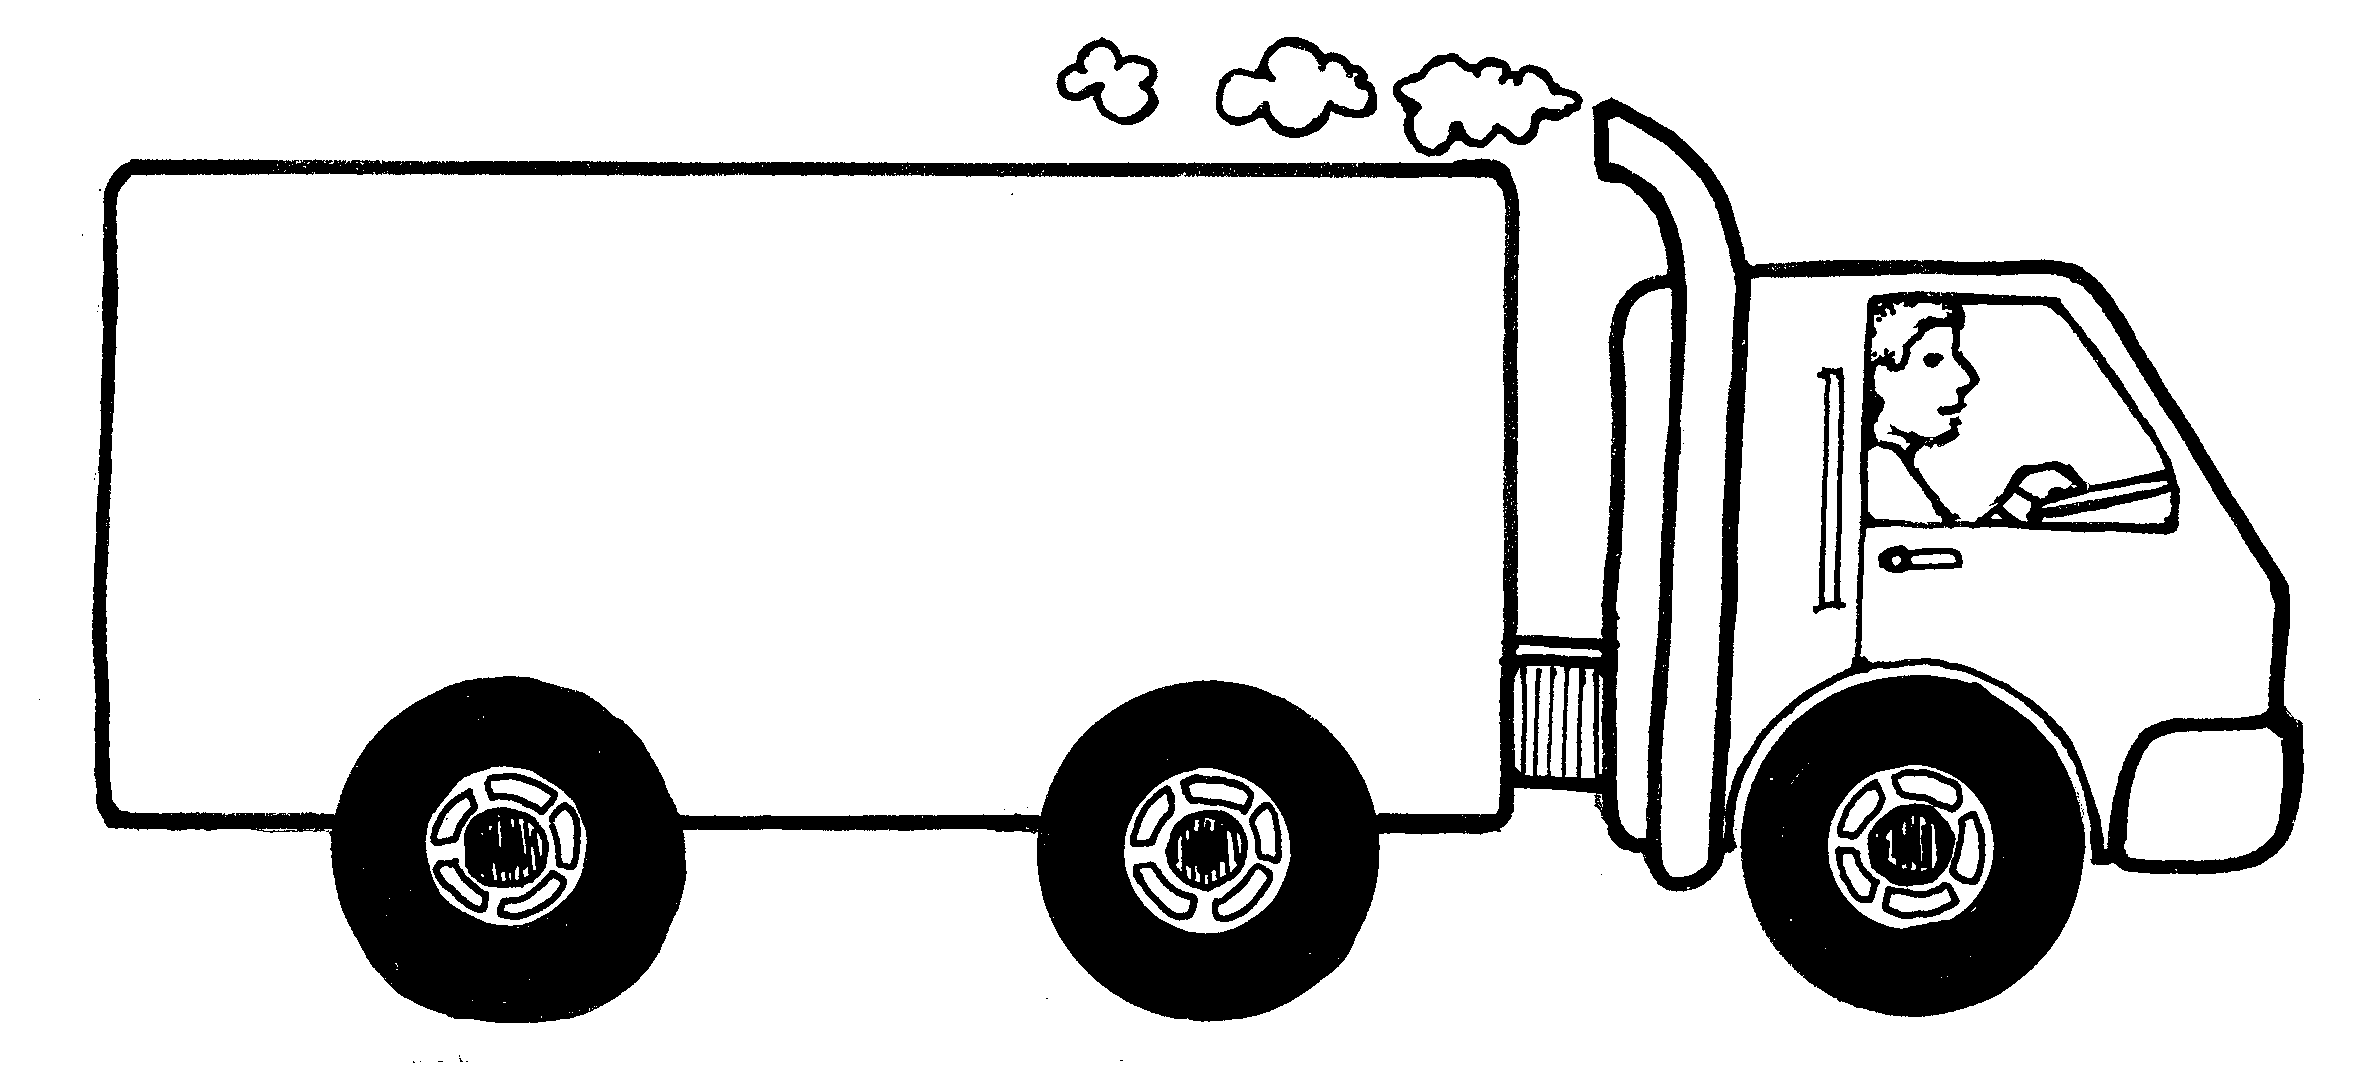 Truck And Trailer Clipart 